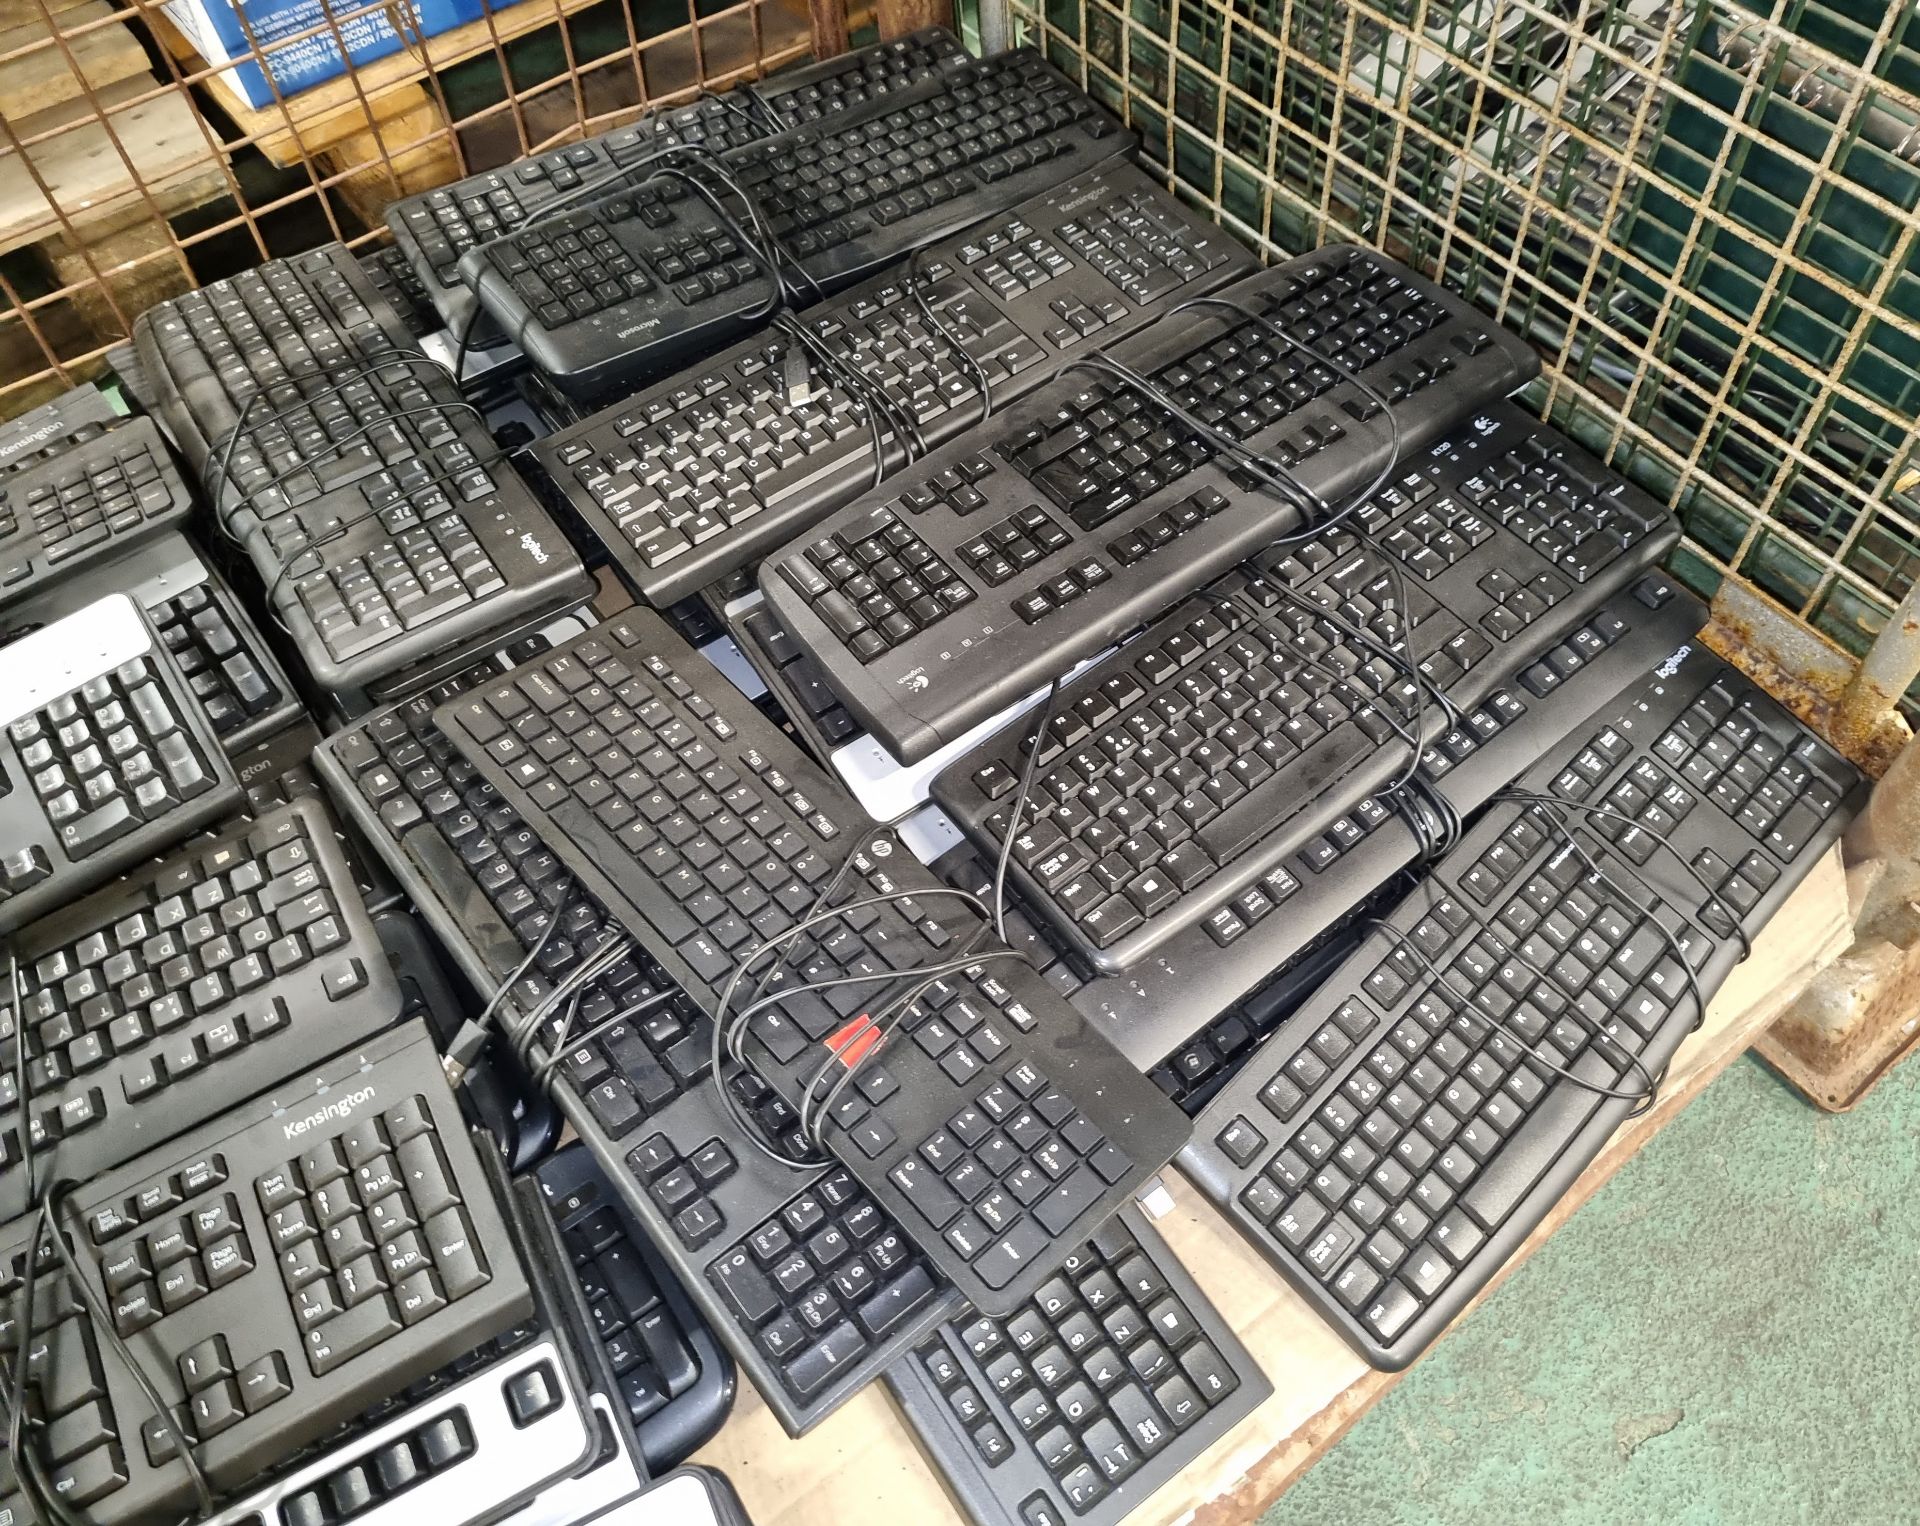 90x computer keyboards of multiple makes - HP, Logitech and Kensington - Image 5 of 5